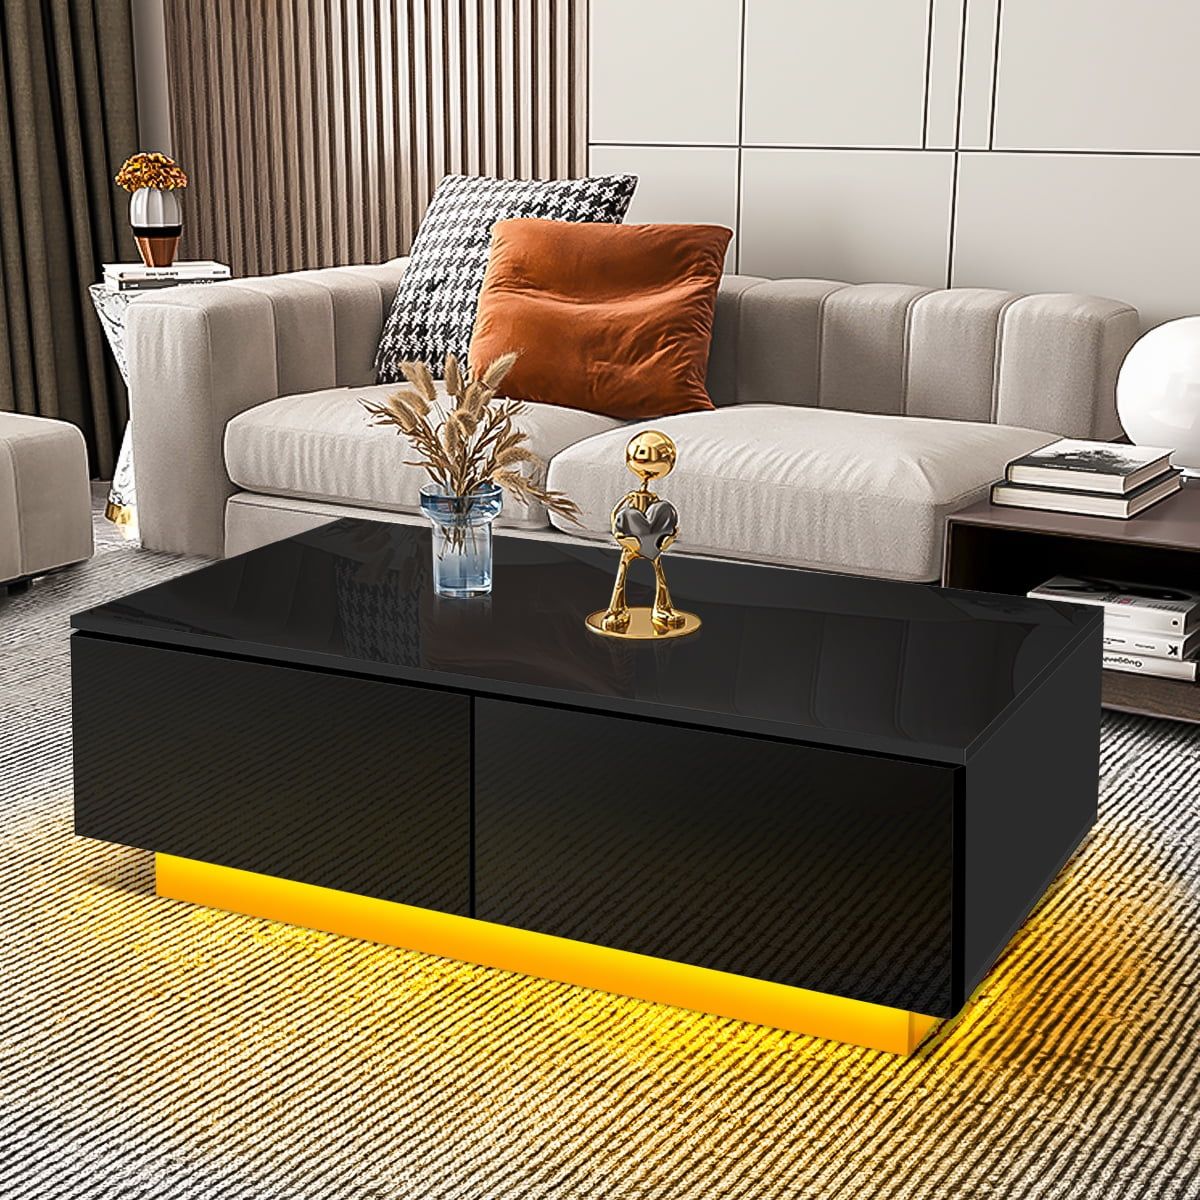 High Gloss Rectangle Coffee Table Led Cocktail Tables With 4 Storage Drawers  Modern Center Tea Table For Living Room – Walmart With Led Coffee Tables With 4 Drawers (Photo 11 of 15)